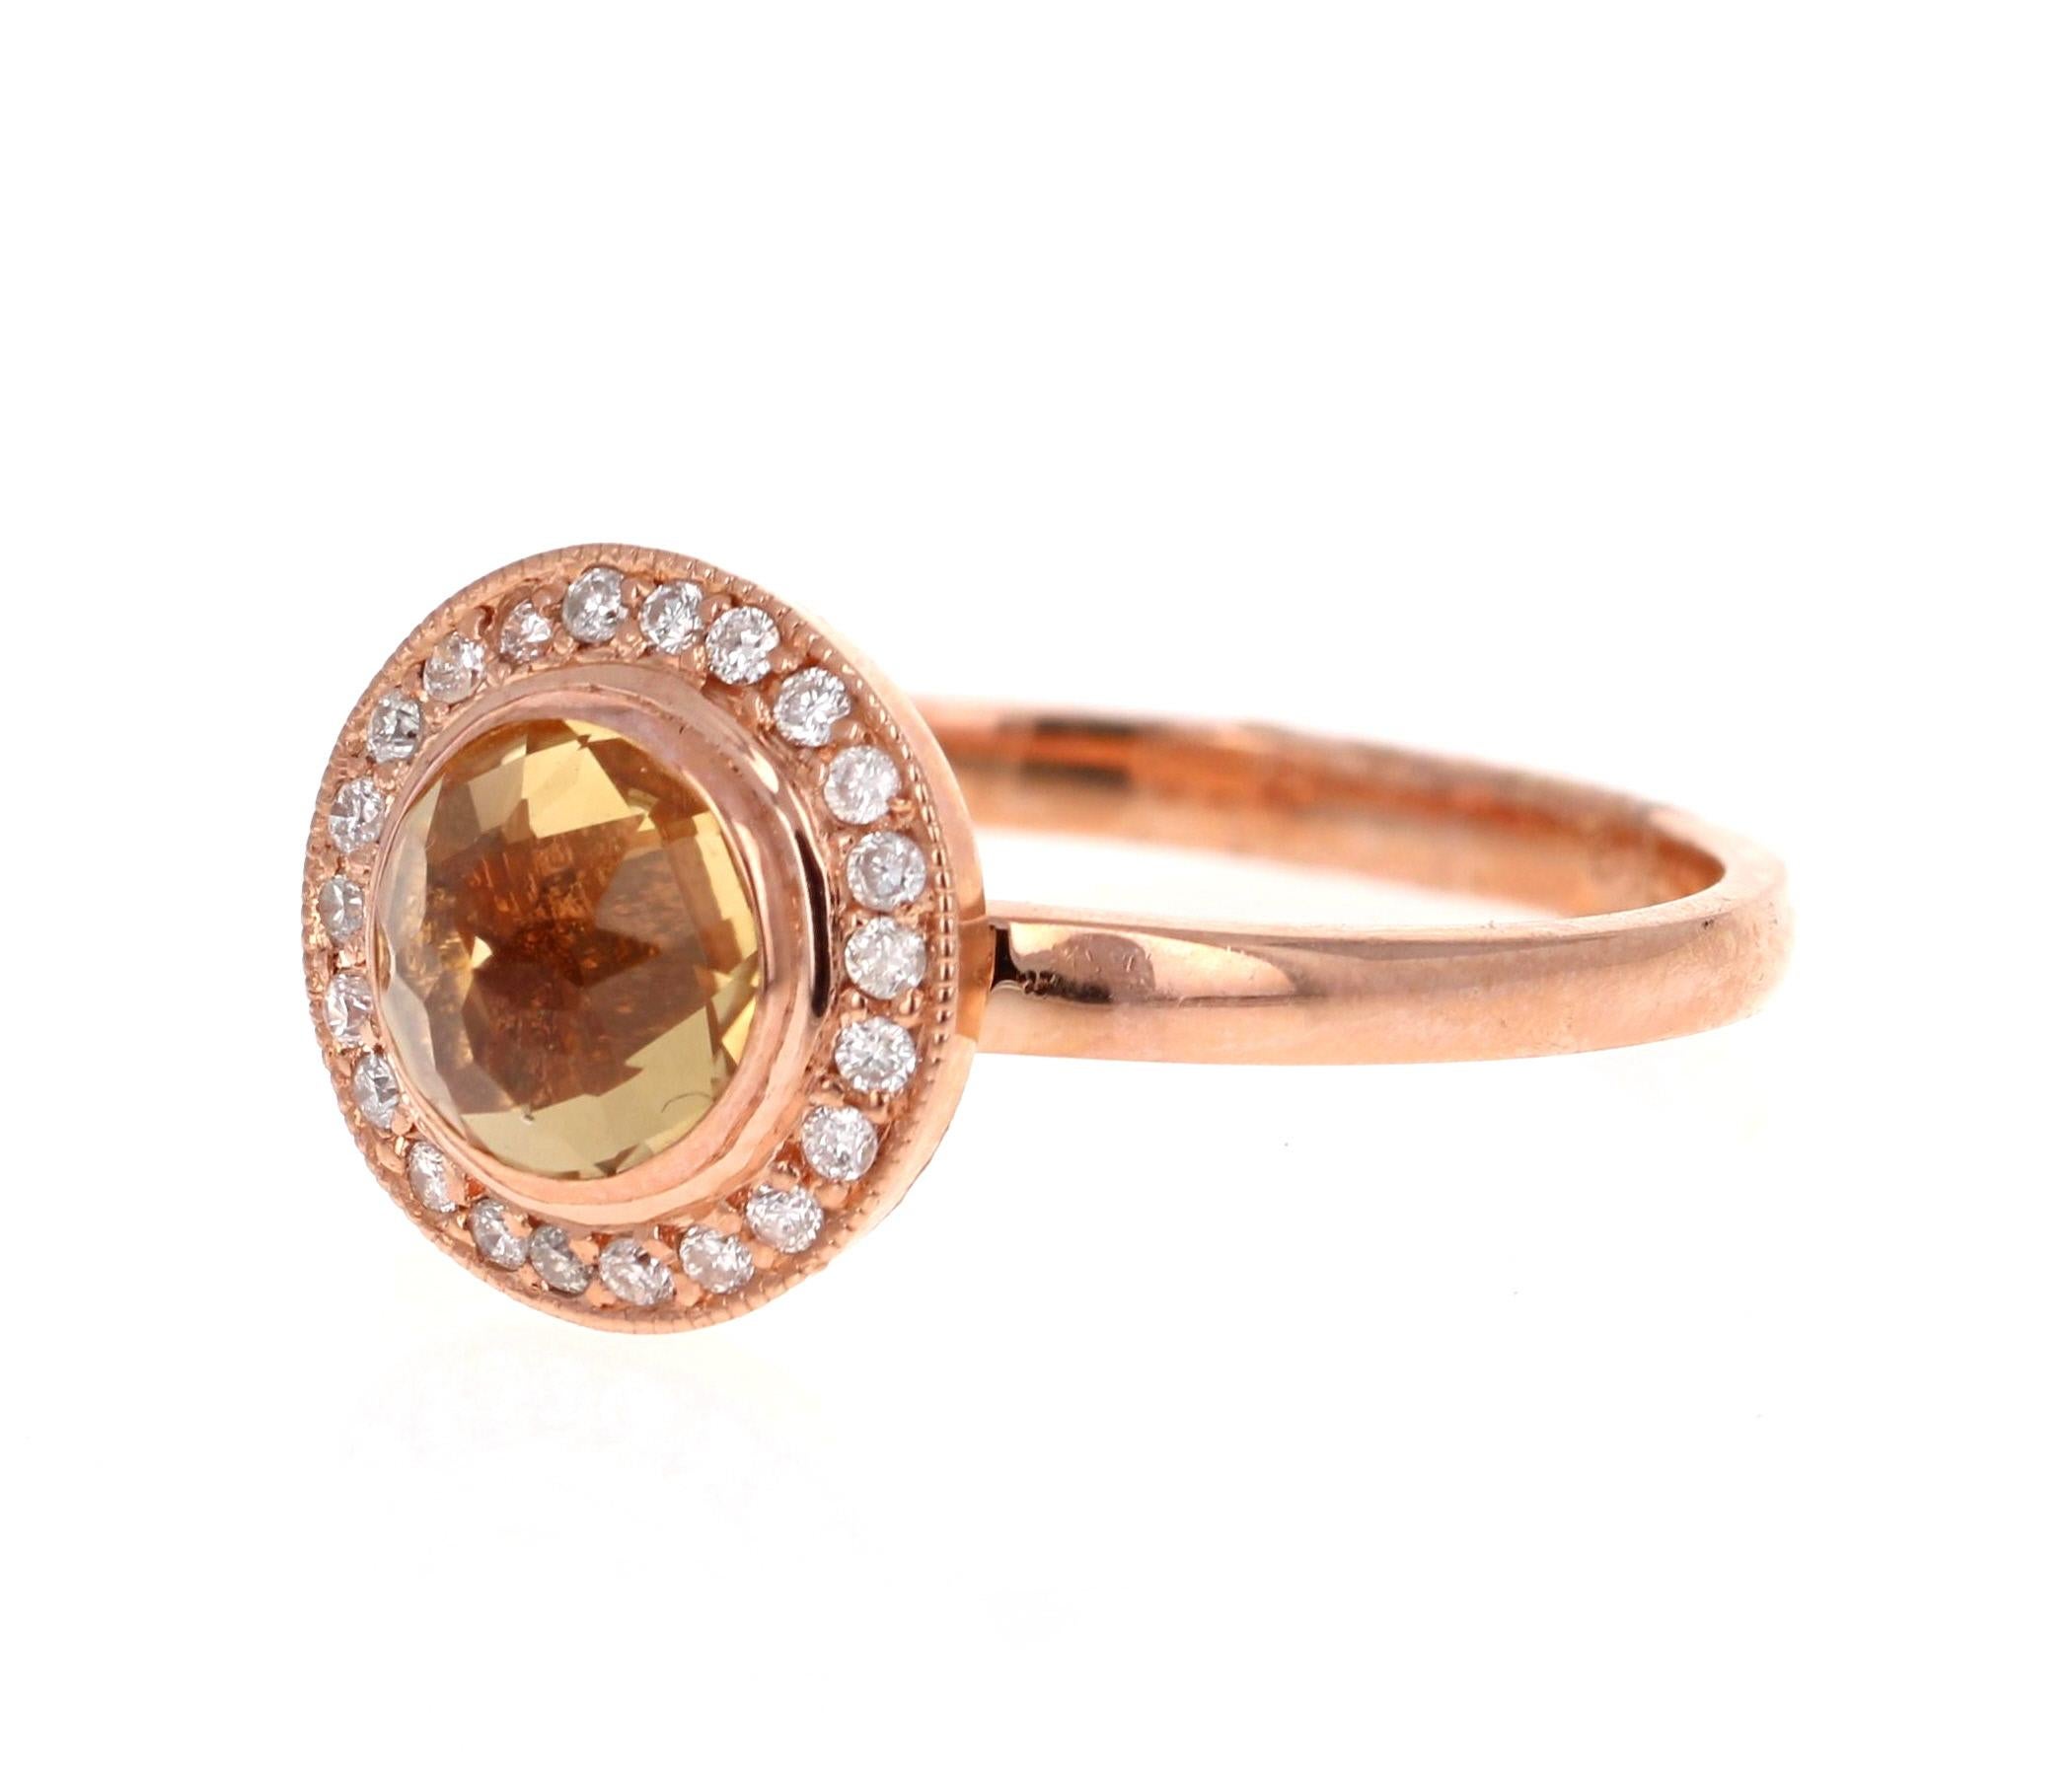 A cute and dainty Citrine ring accented with some Diamonds!

This cute ring has a Round Cut Citrine that weighs 0.79 Carats and is surrounded by a beautiful halo of 22 Round Cut Diamonds that weigh 0.14 Carats. (Clarity: SI, Color: F) The total